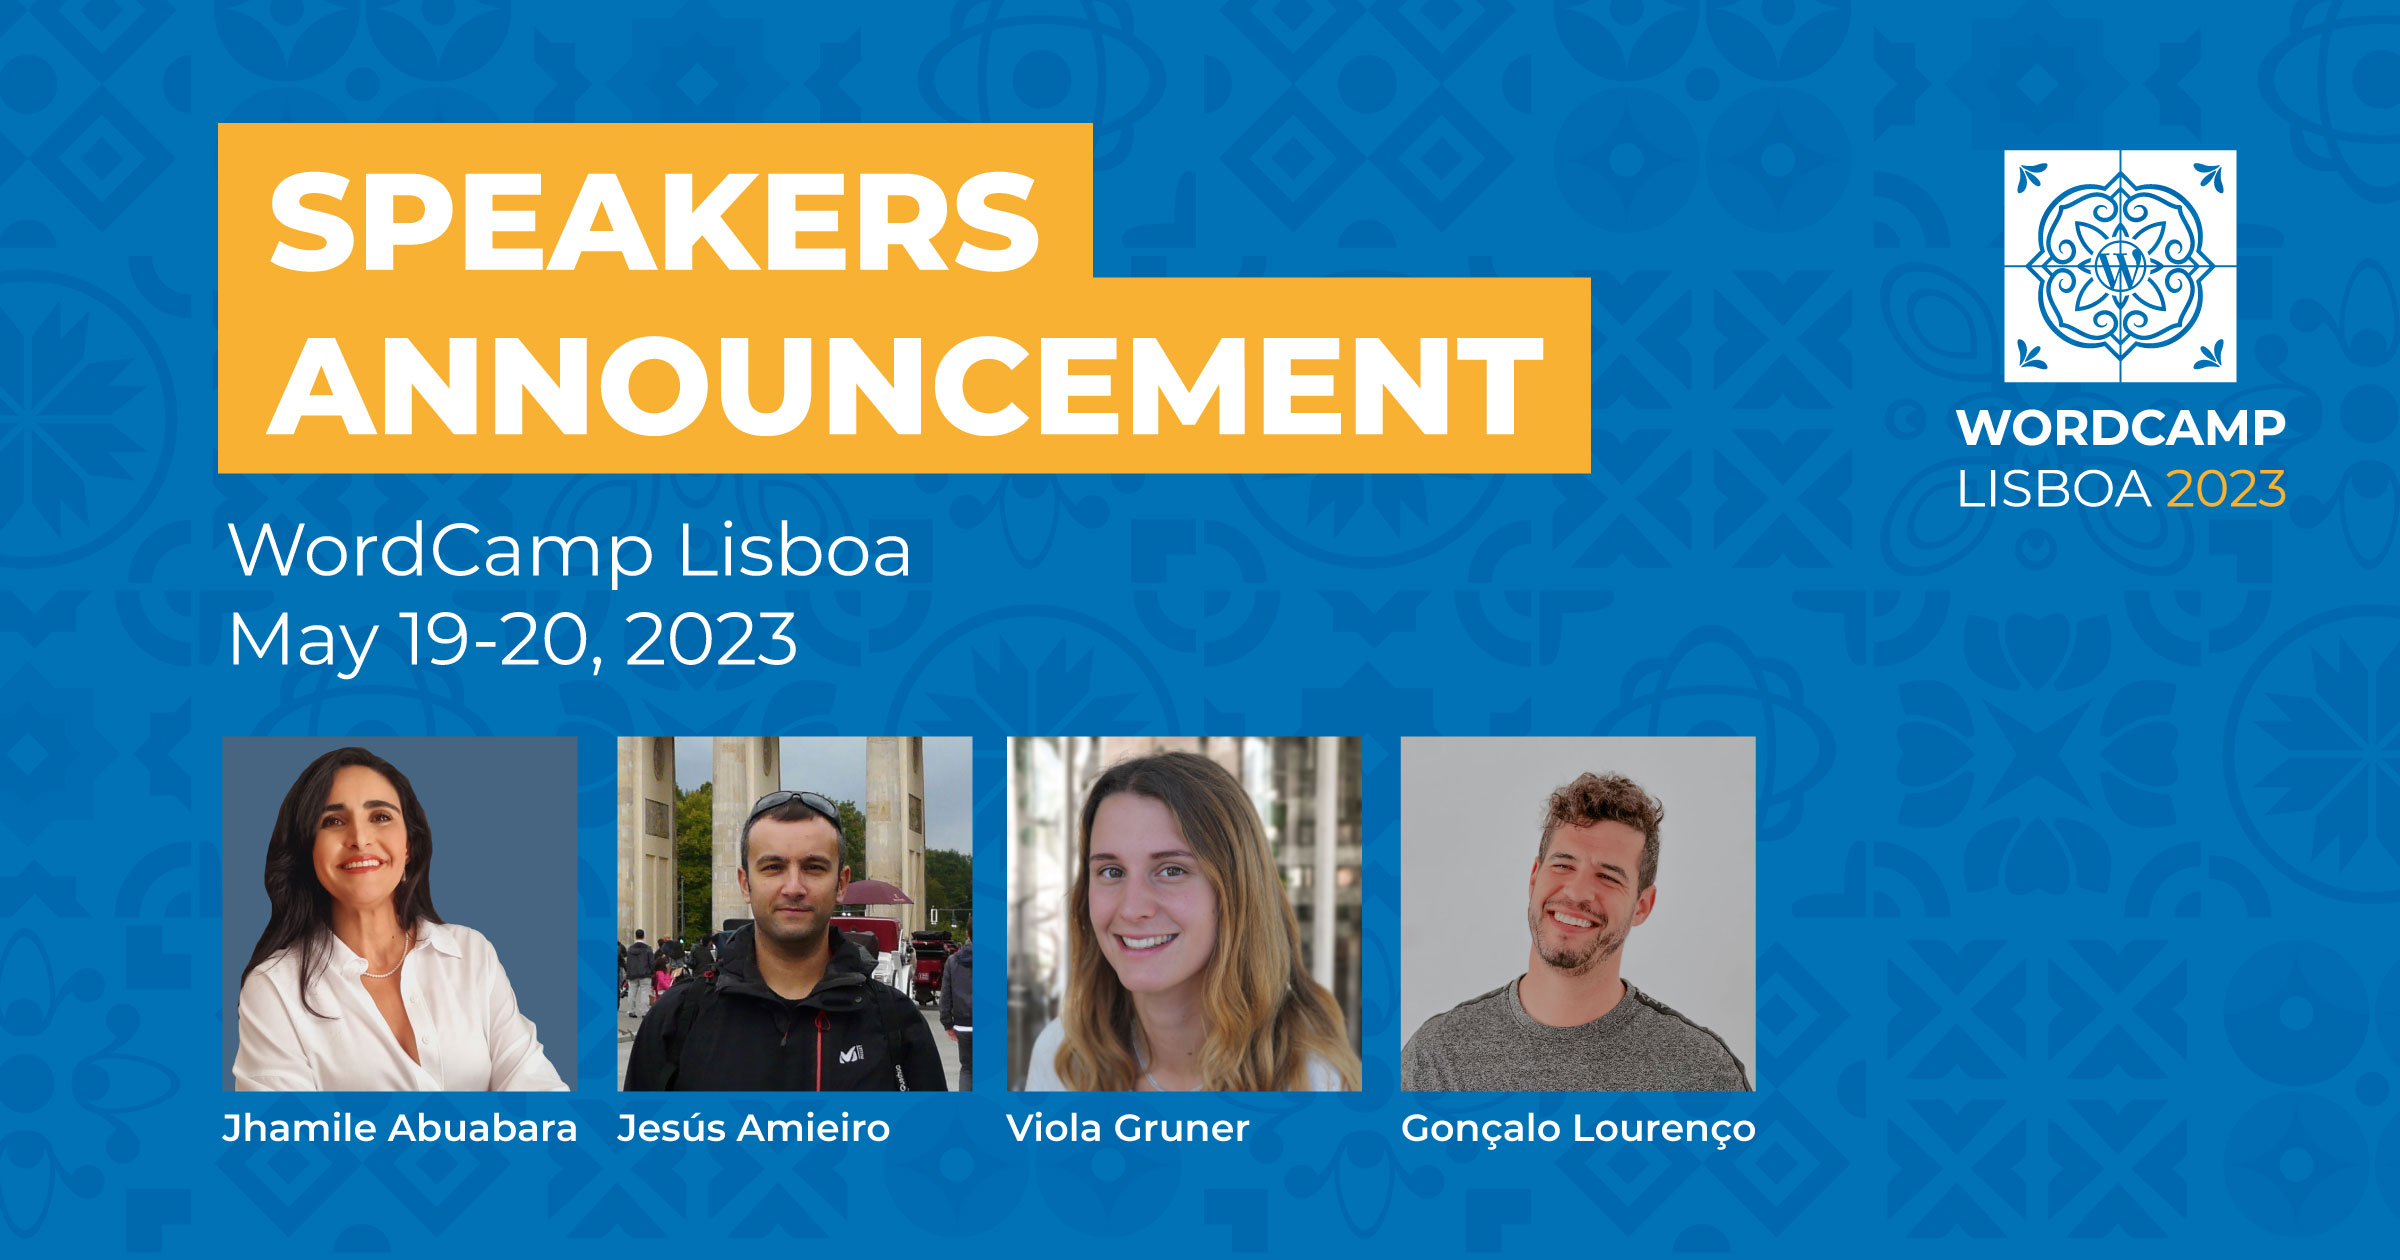 Fifth batch of speakers announced